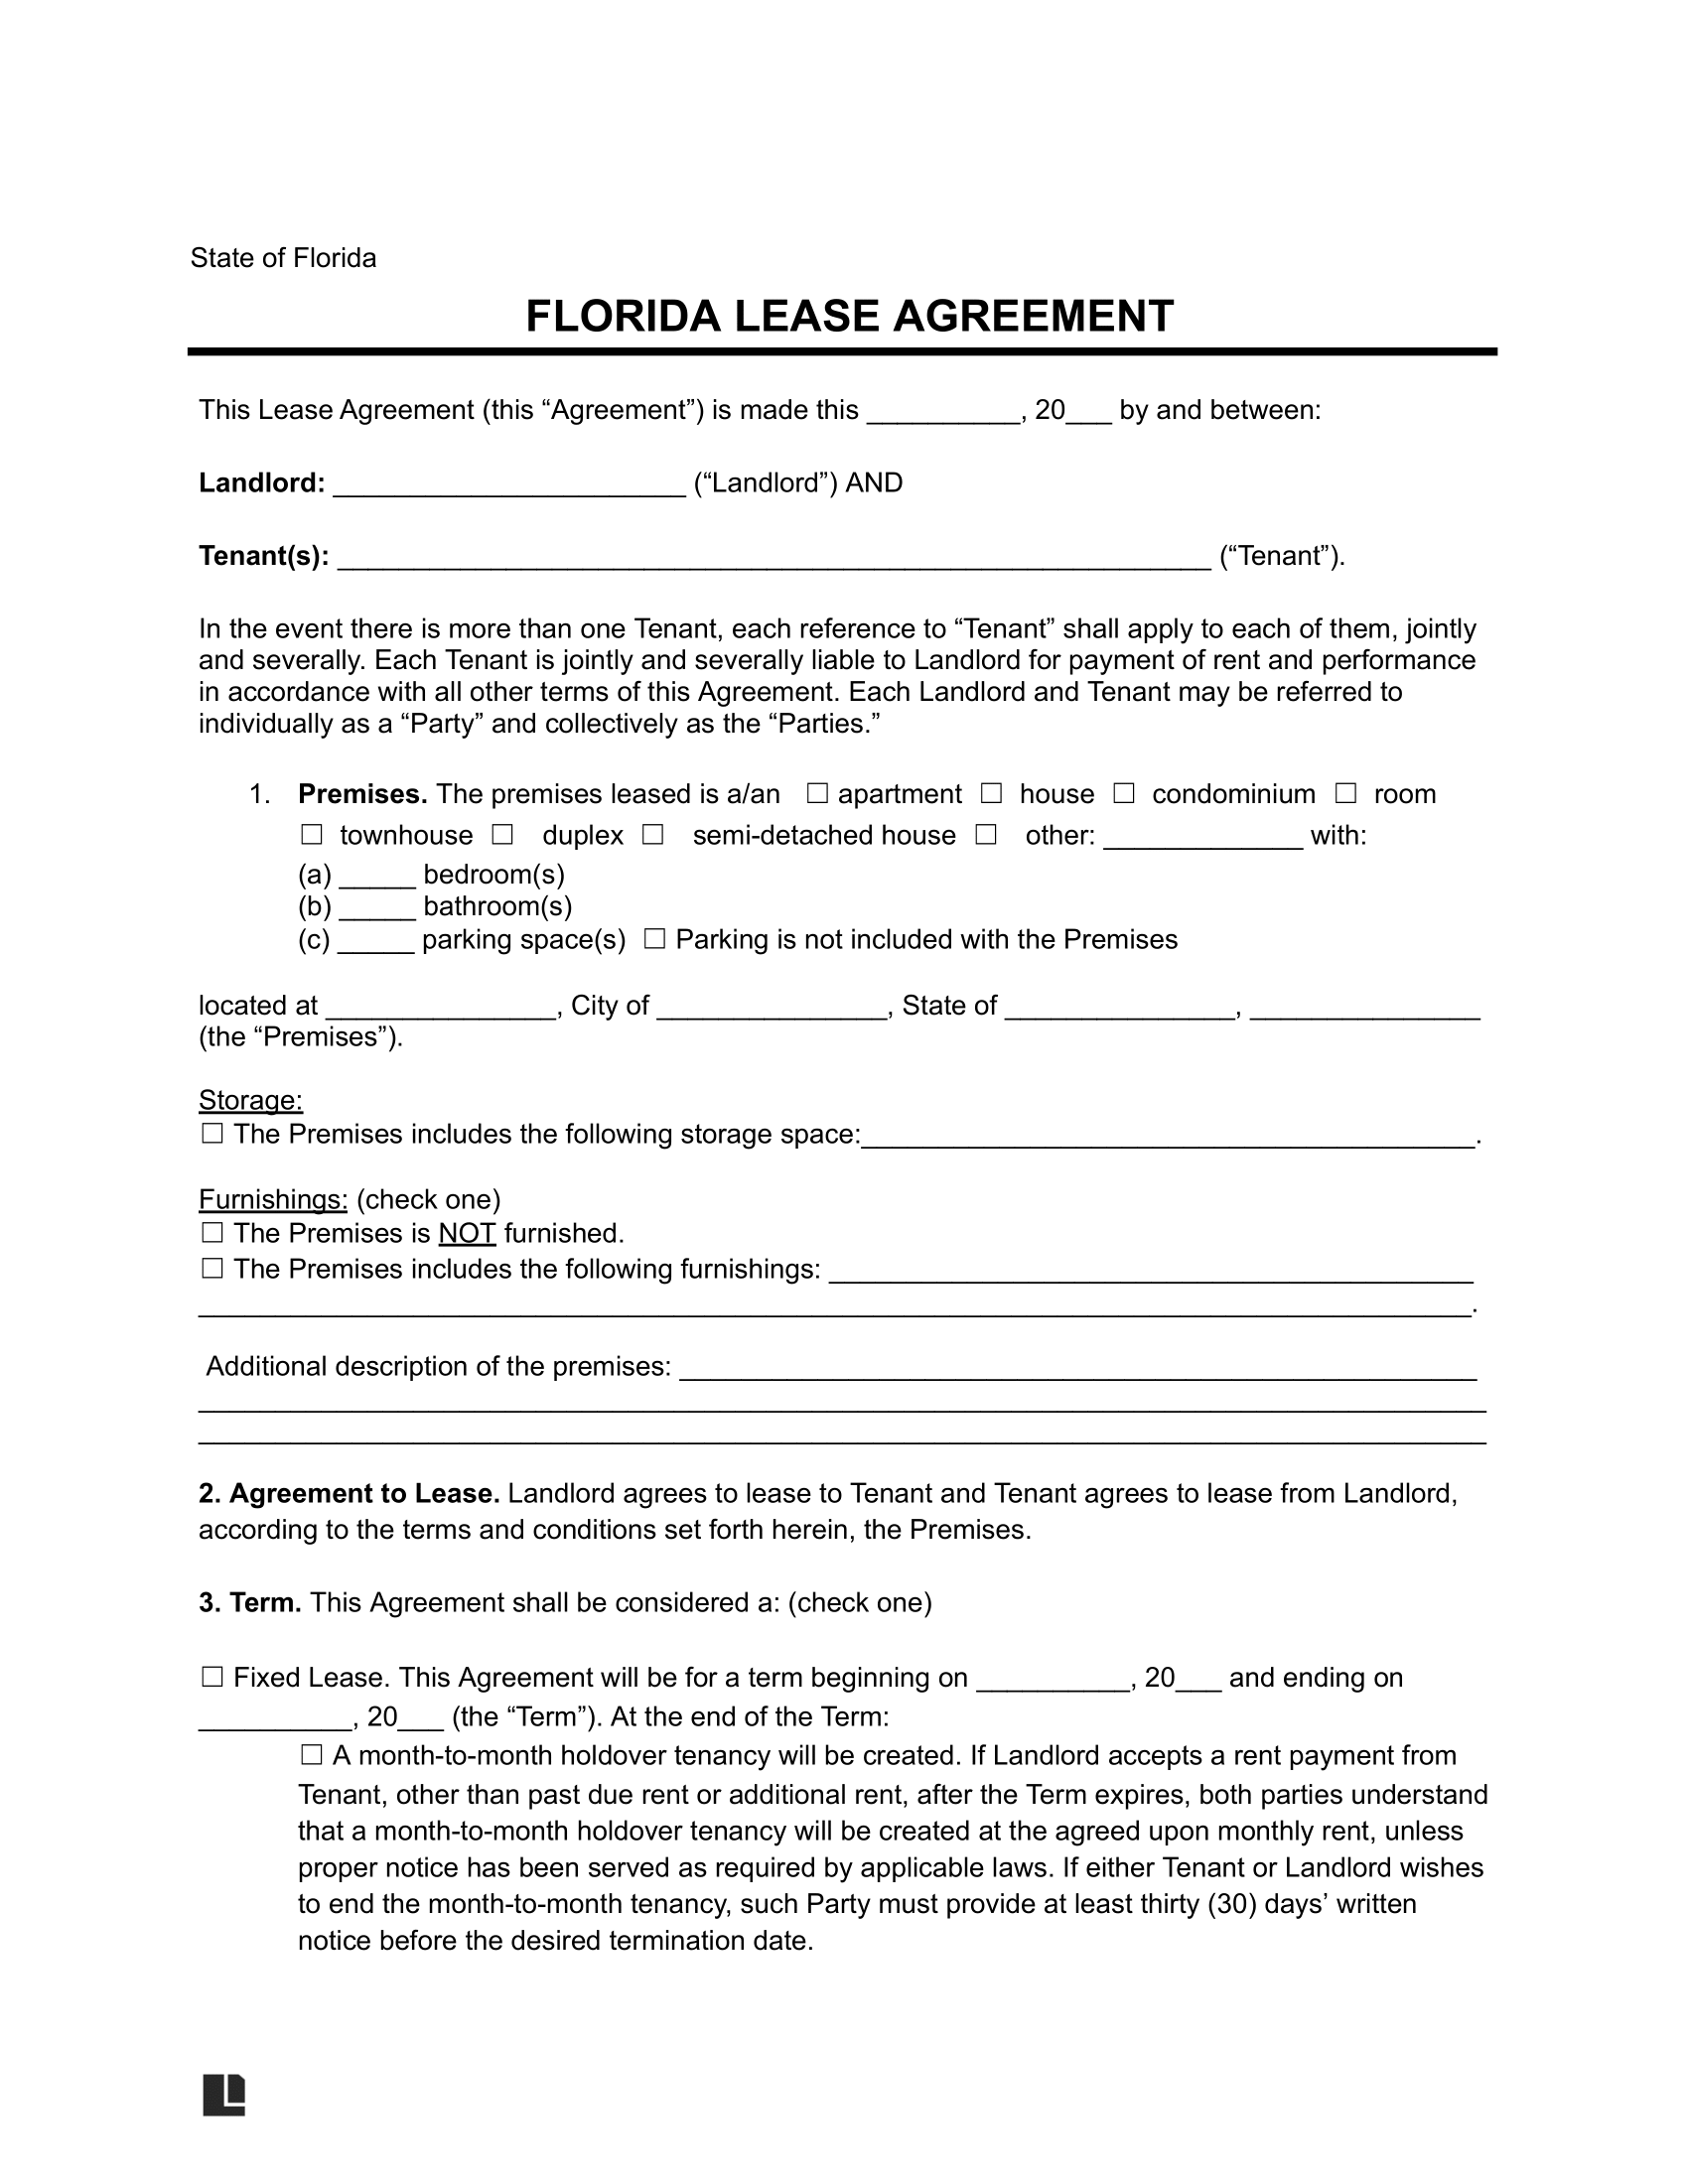 florida residential rental lease agreement